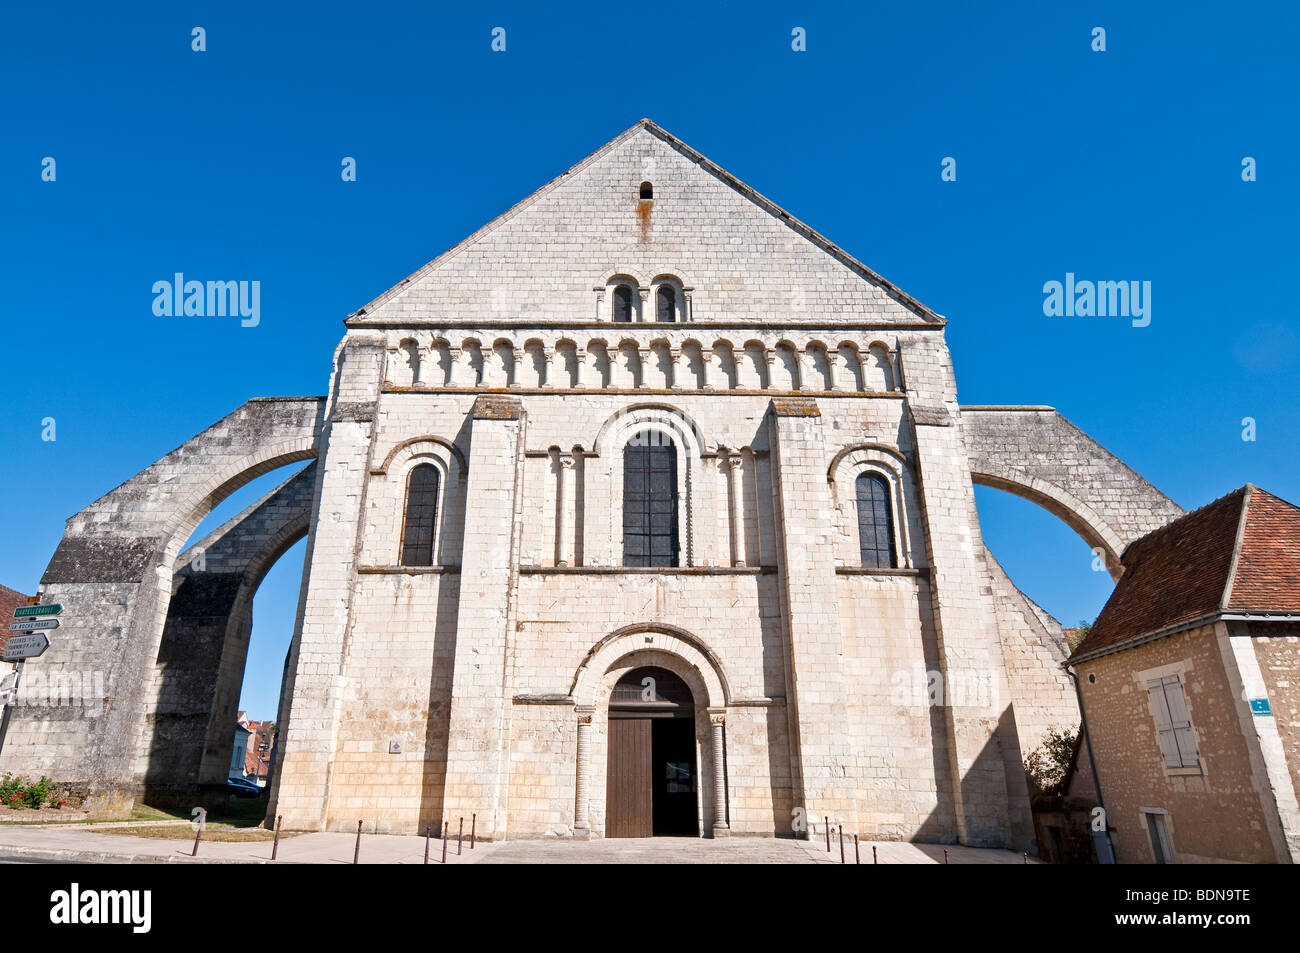 West front facade of ancient Preuilly-sur-Claise abbey church (built 1009), France. Stock Photo